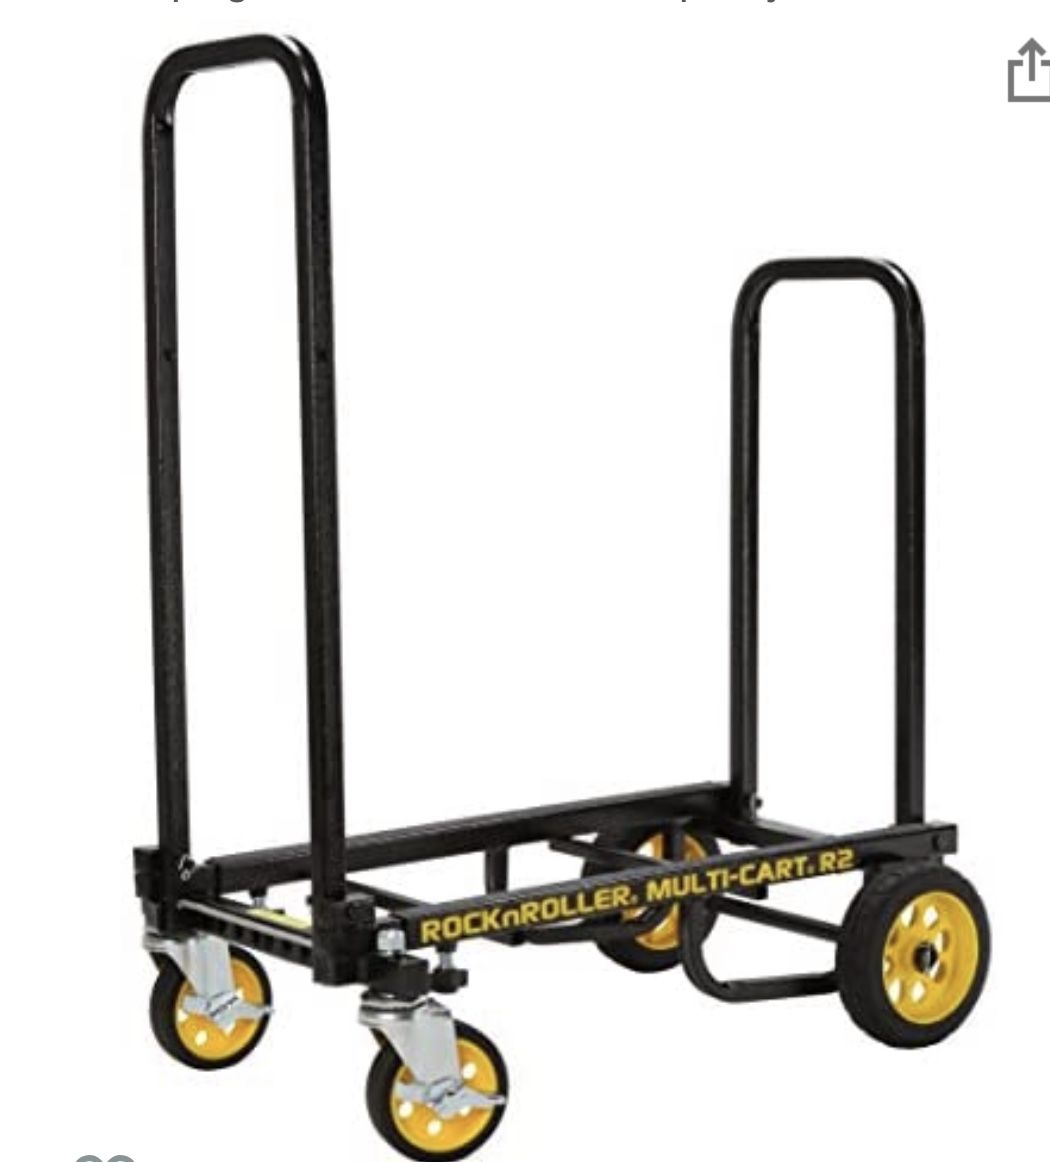 DISCOUNT - 2 Of These For $50 Rock N Roller Multi Cart R2 - model R2RT  - Folding Cart